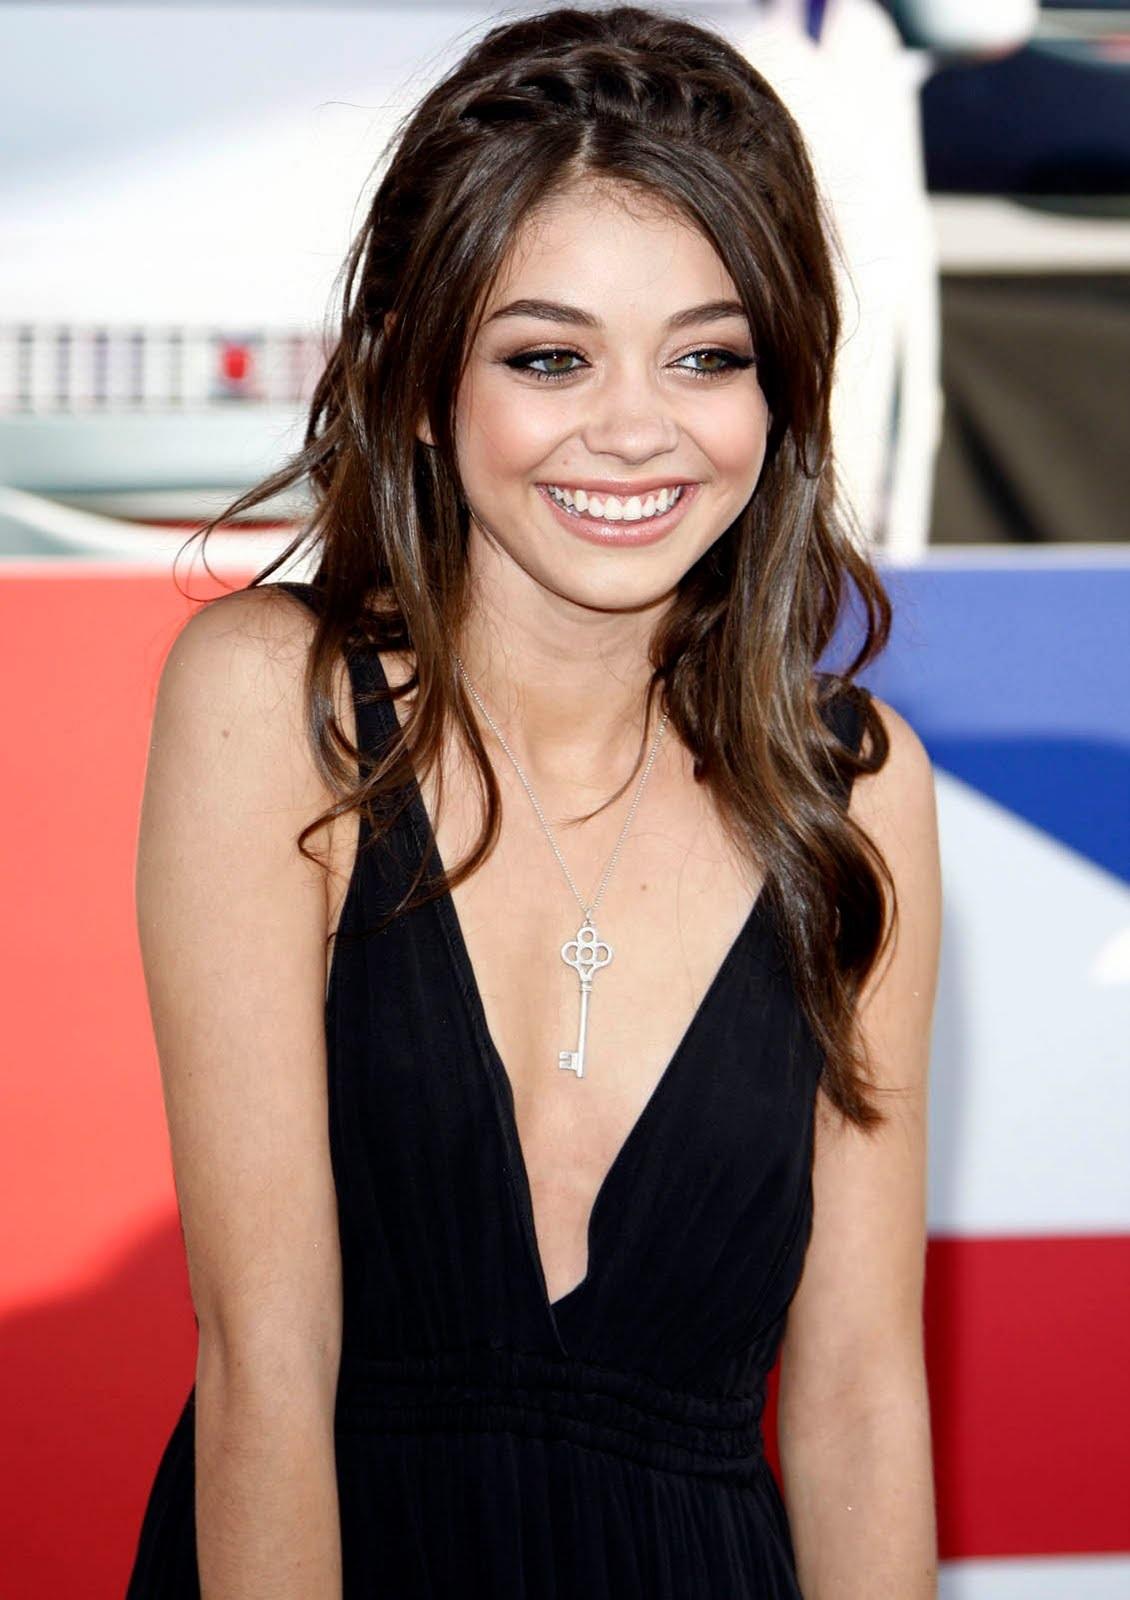 Pictures Of Sarah Hyland Pictures Of Celebrities